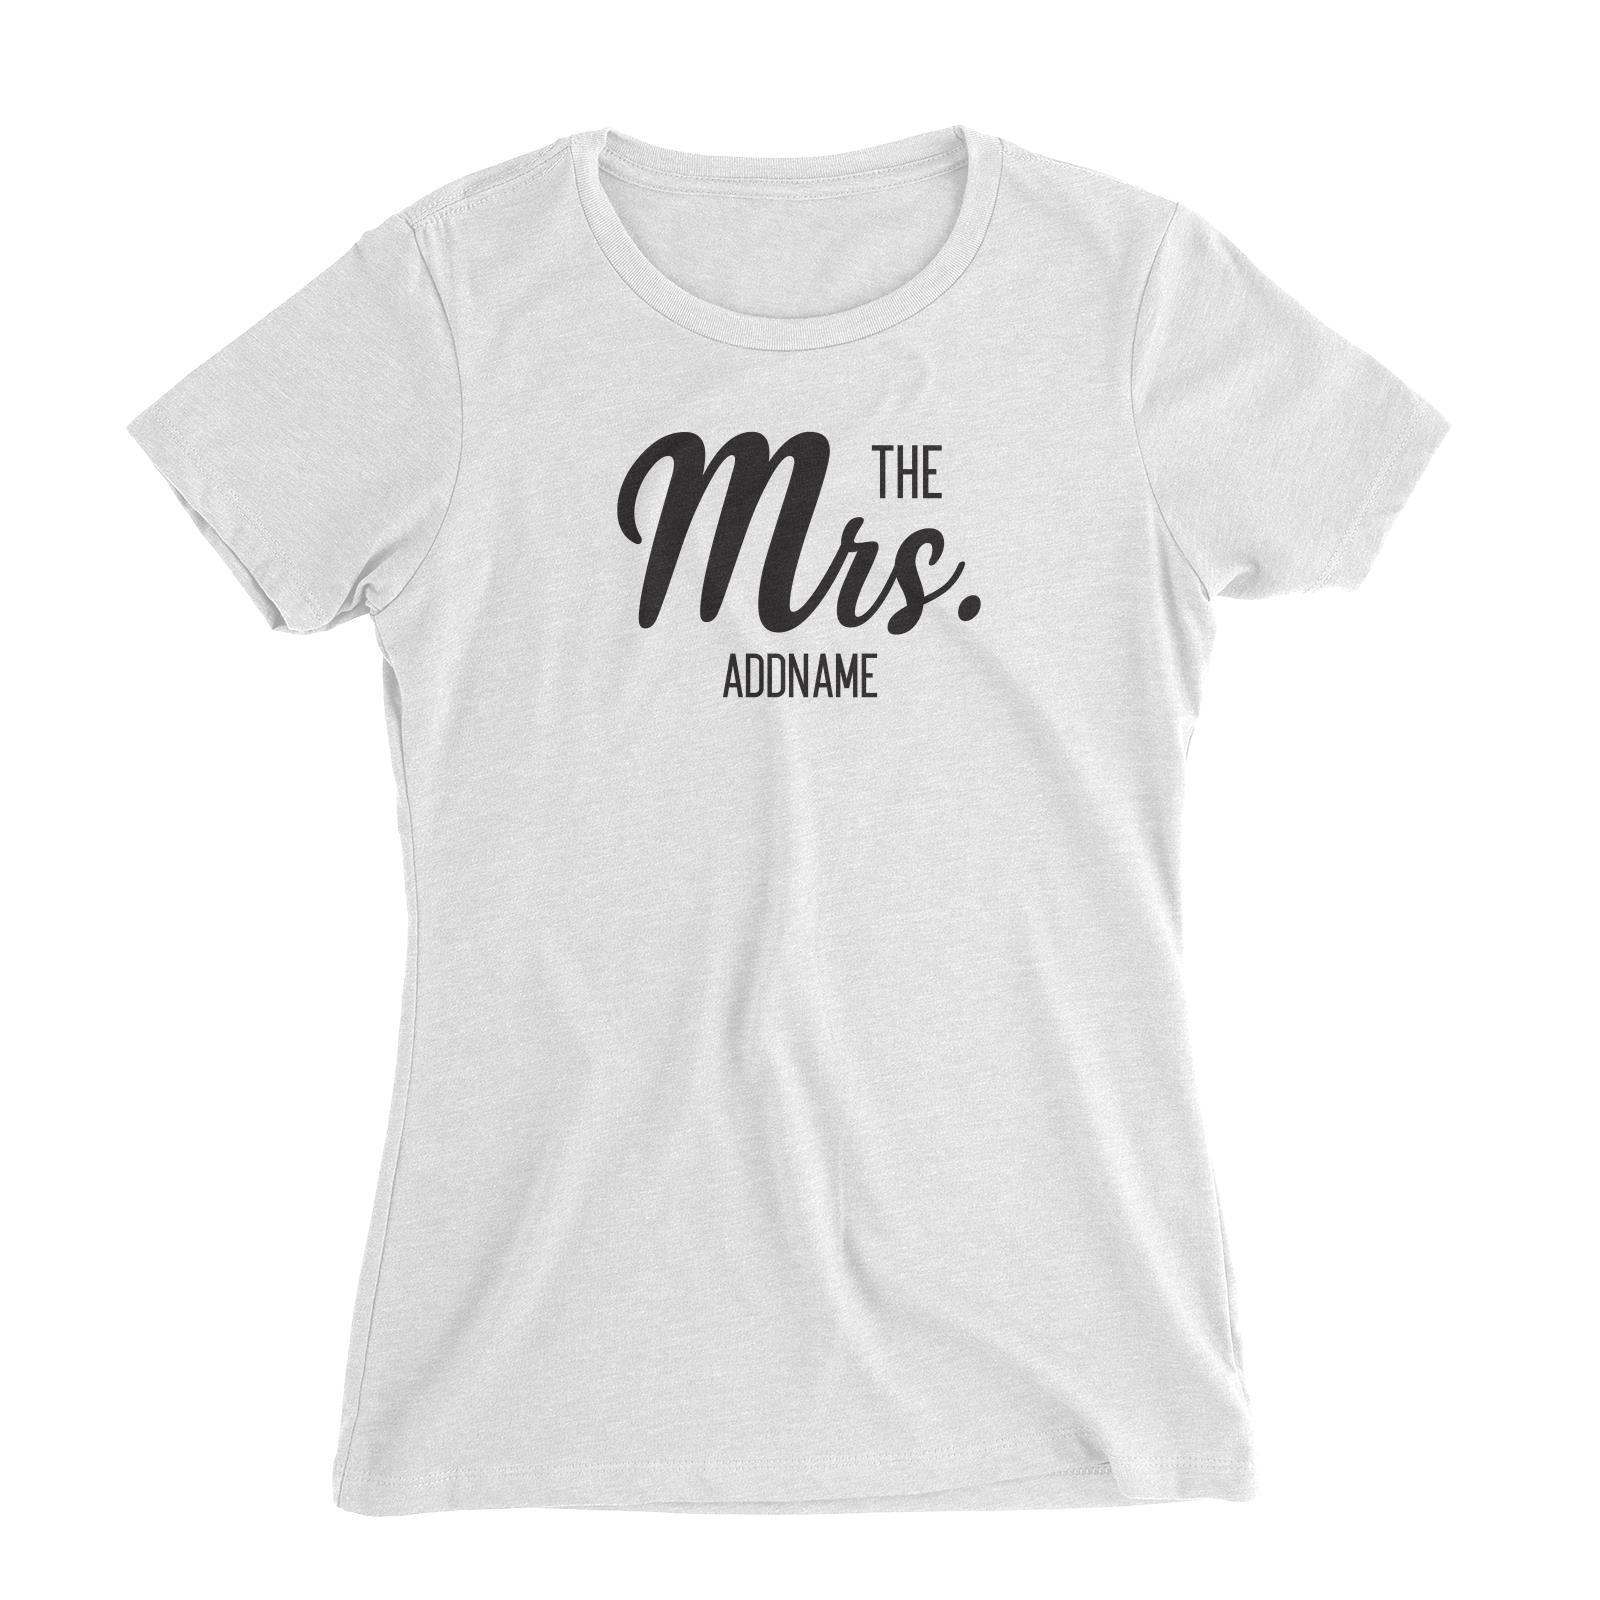 Husband and Wife The Mrs. Addname Women Slim Fit T-Shirt